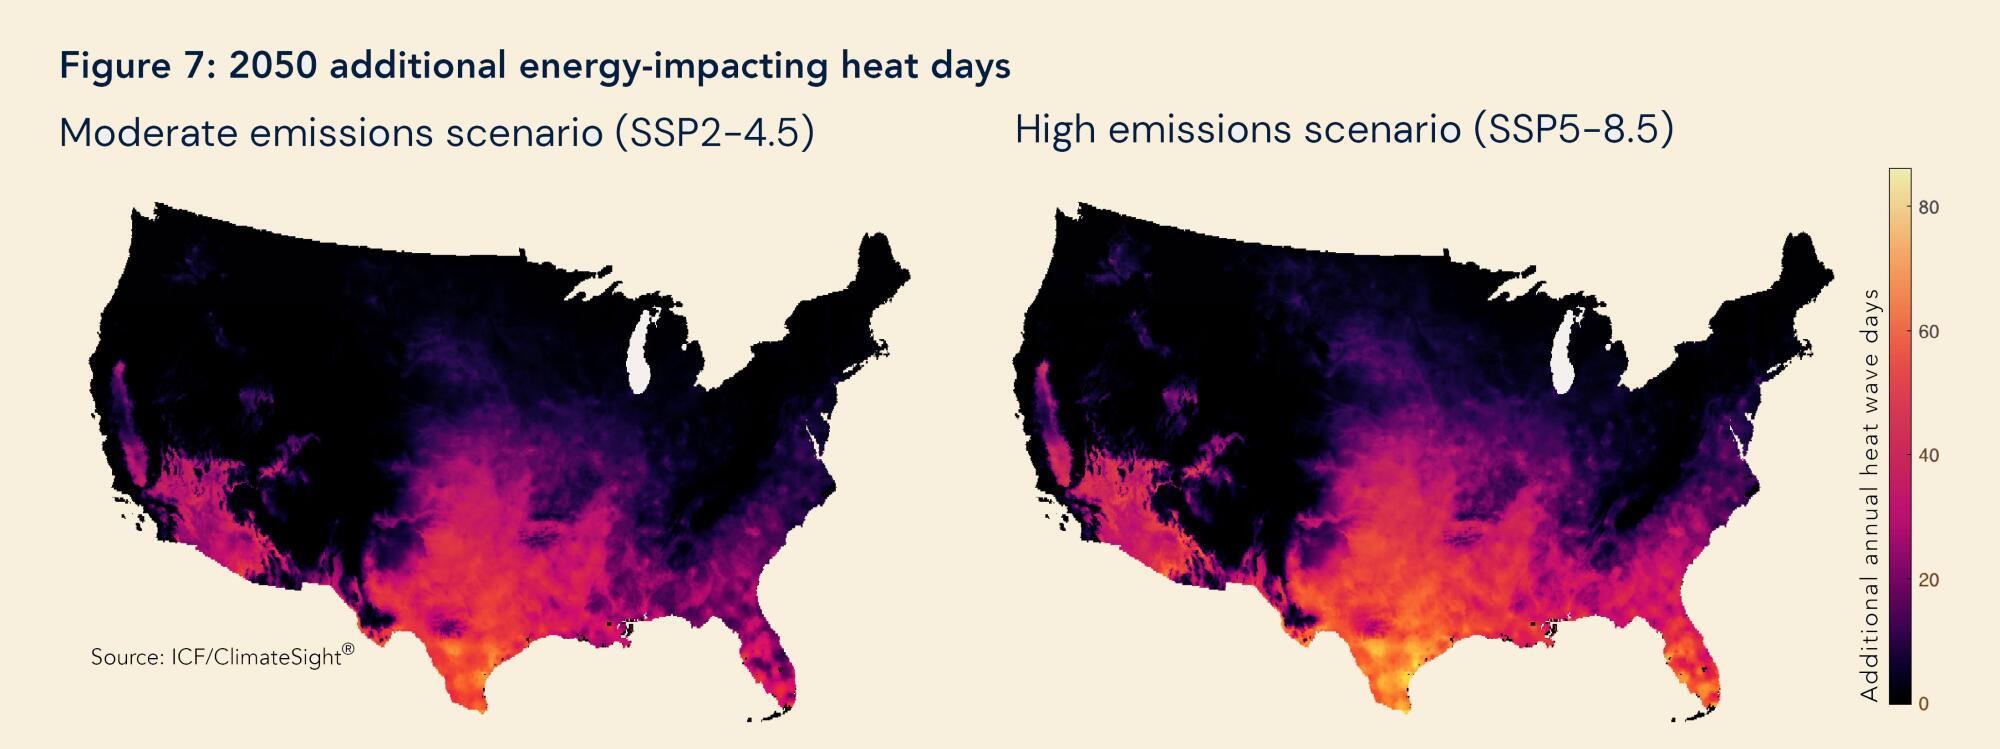 A map shows how increasing hot days could affect energy systems across the country by 2050.